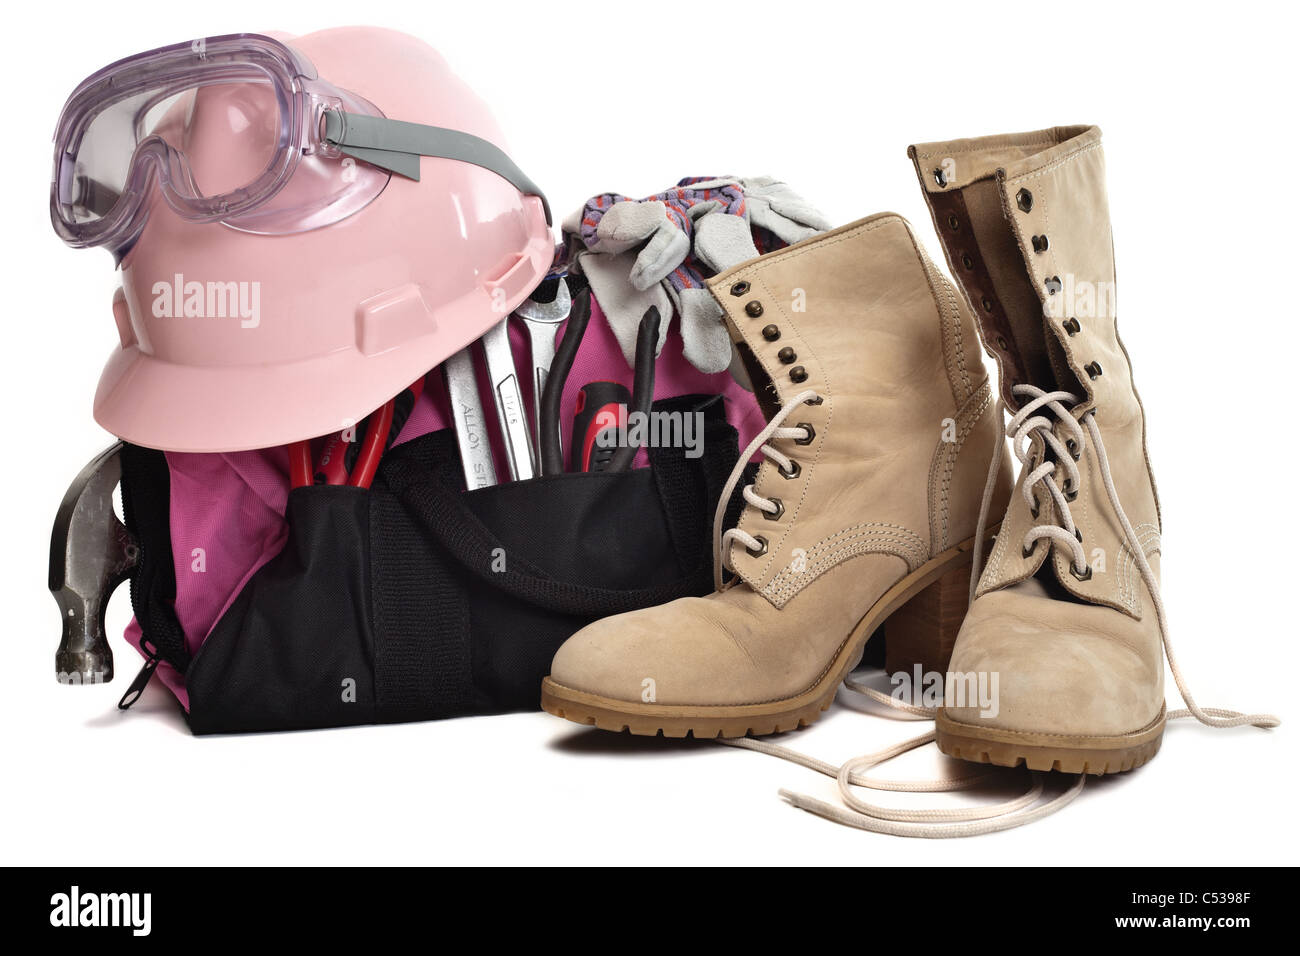 a woman's tool bag. tools, hard hat, goggles and boots. A pink tool bag and pink hard hat. Stock Photo